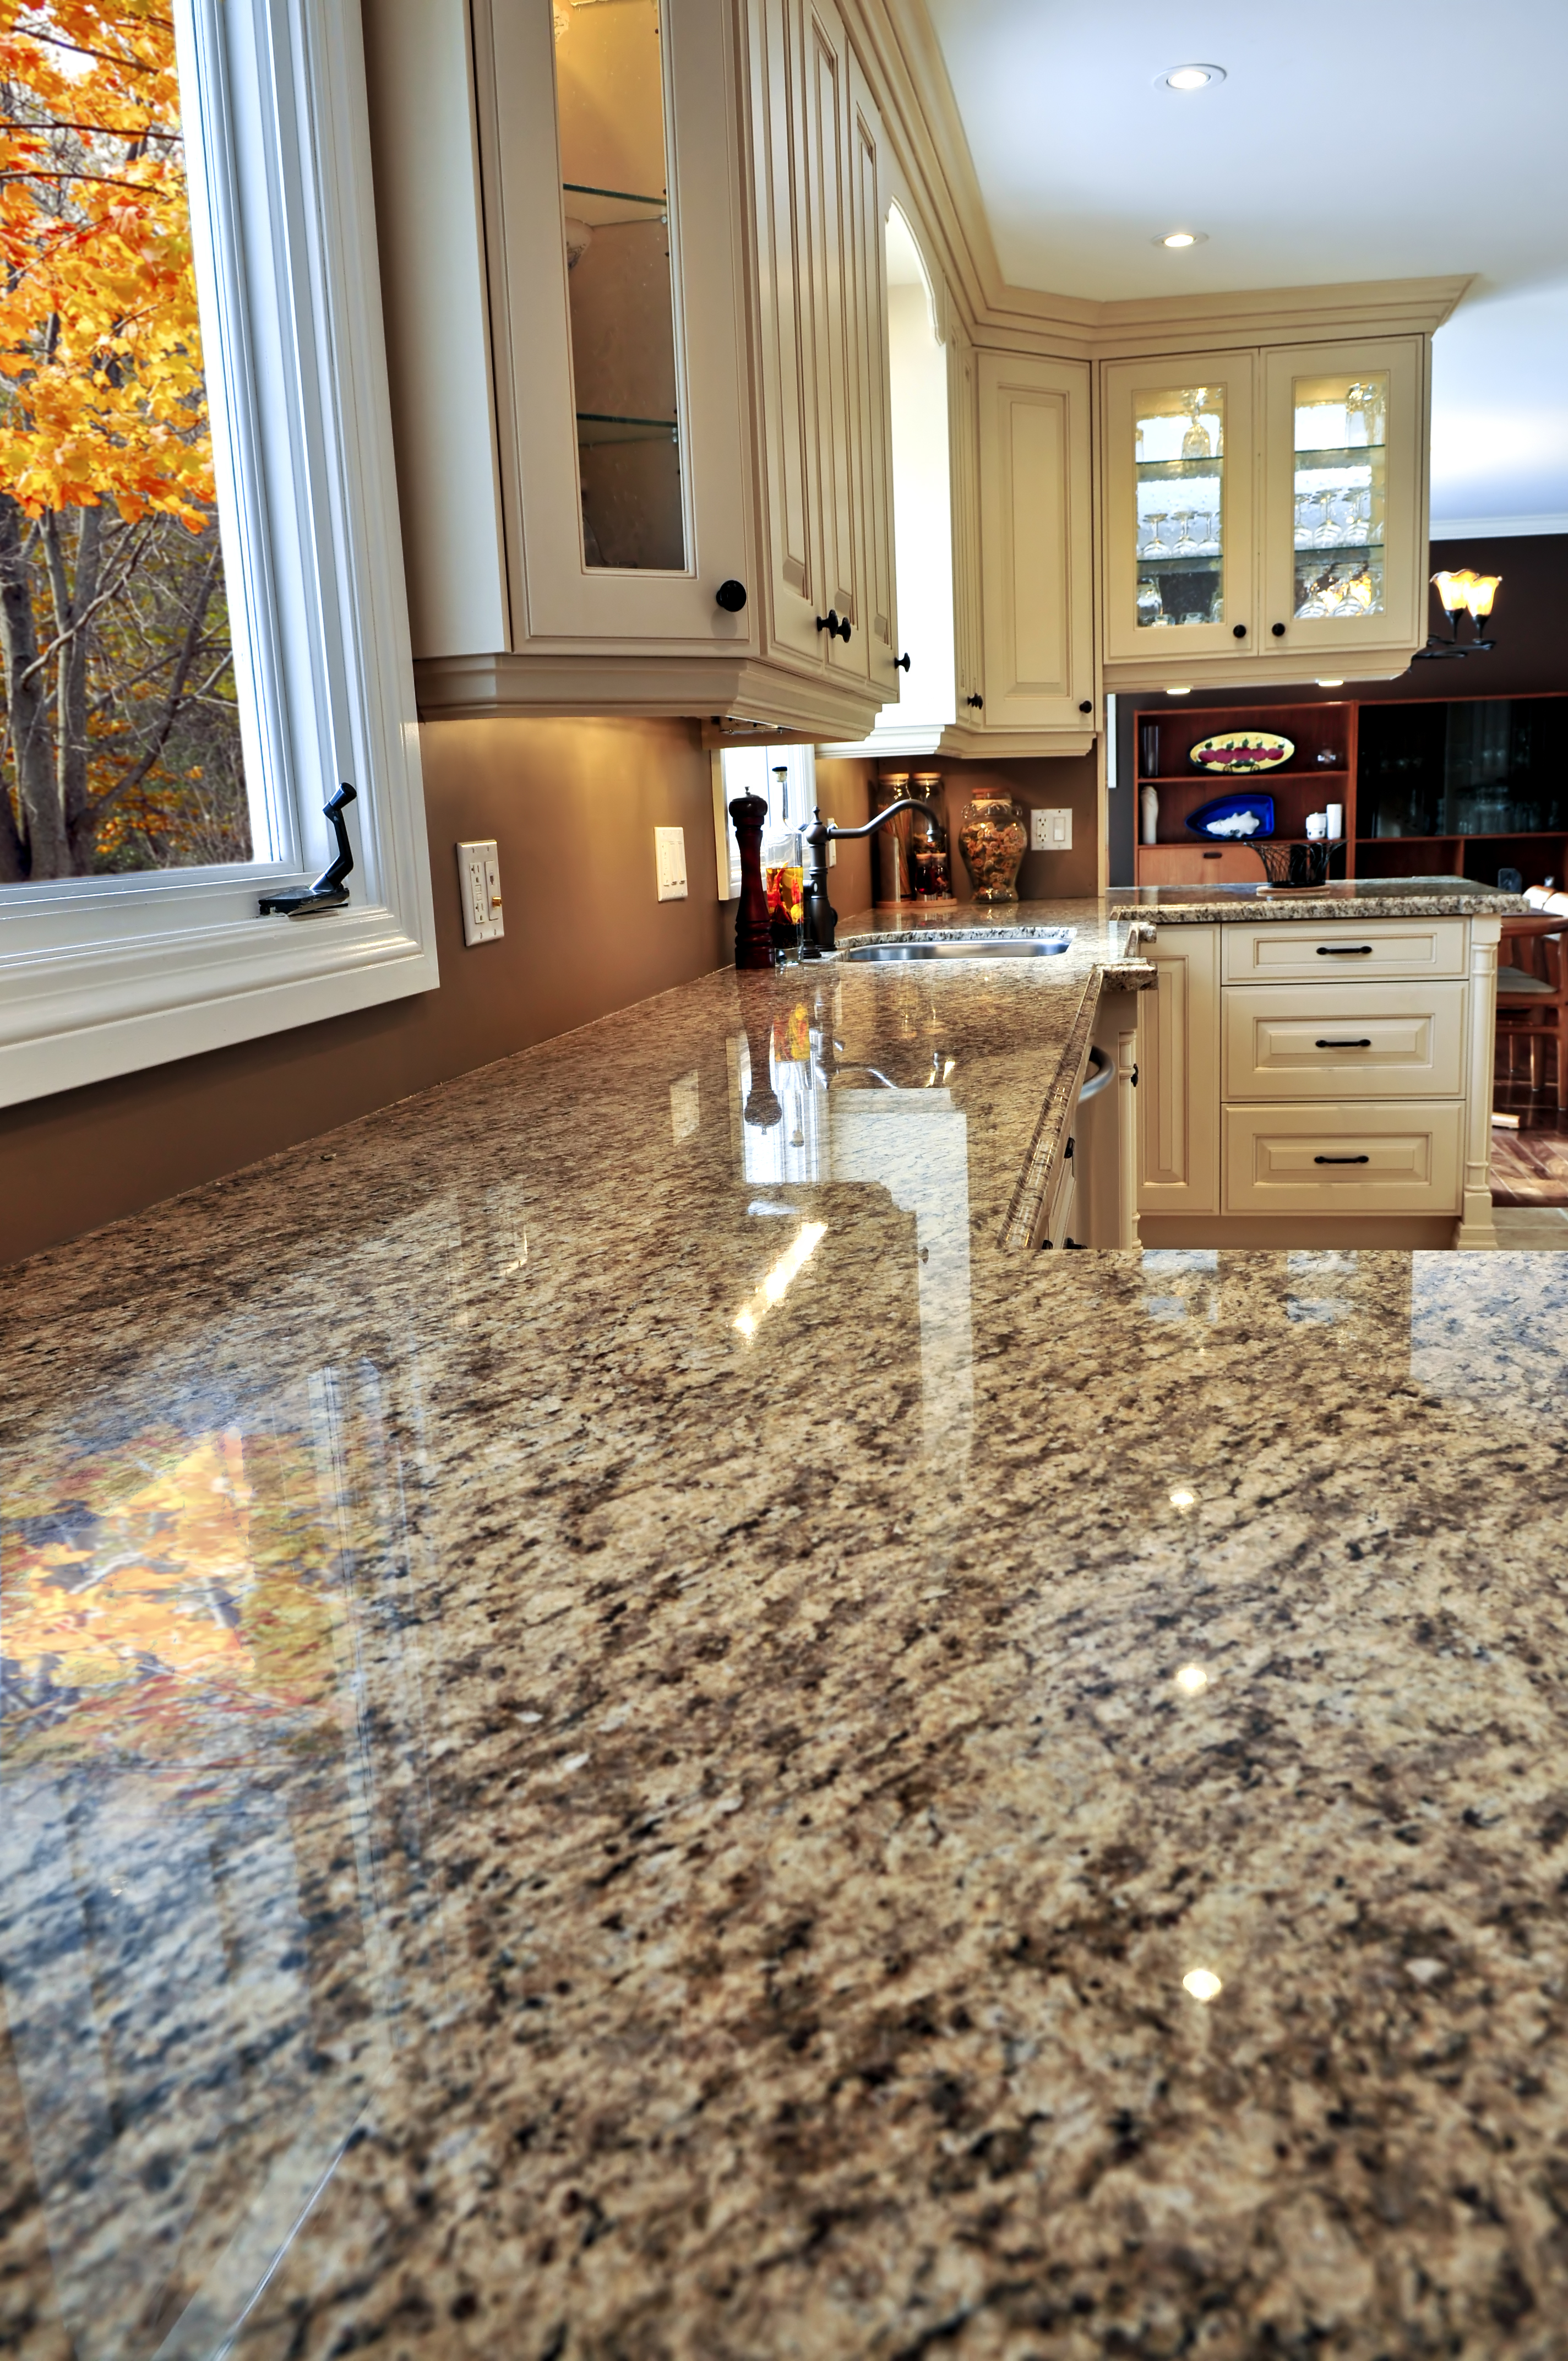 7 Common Kitchen Countertop Problems, How To Separate Two Pieces Of Granite Countertop